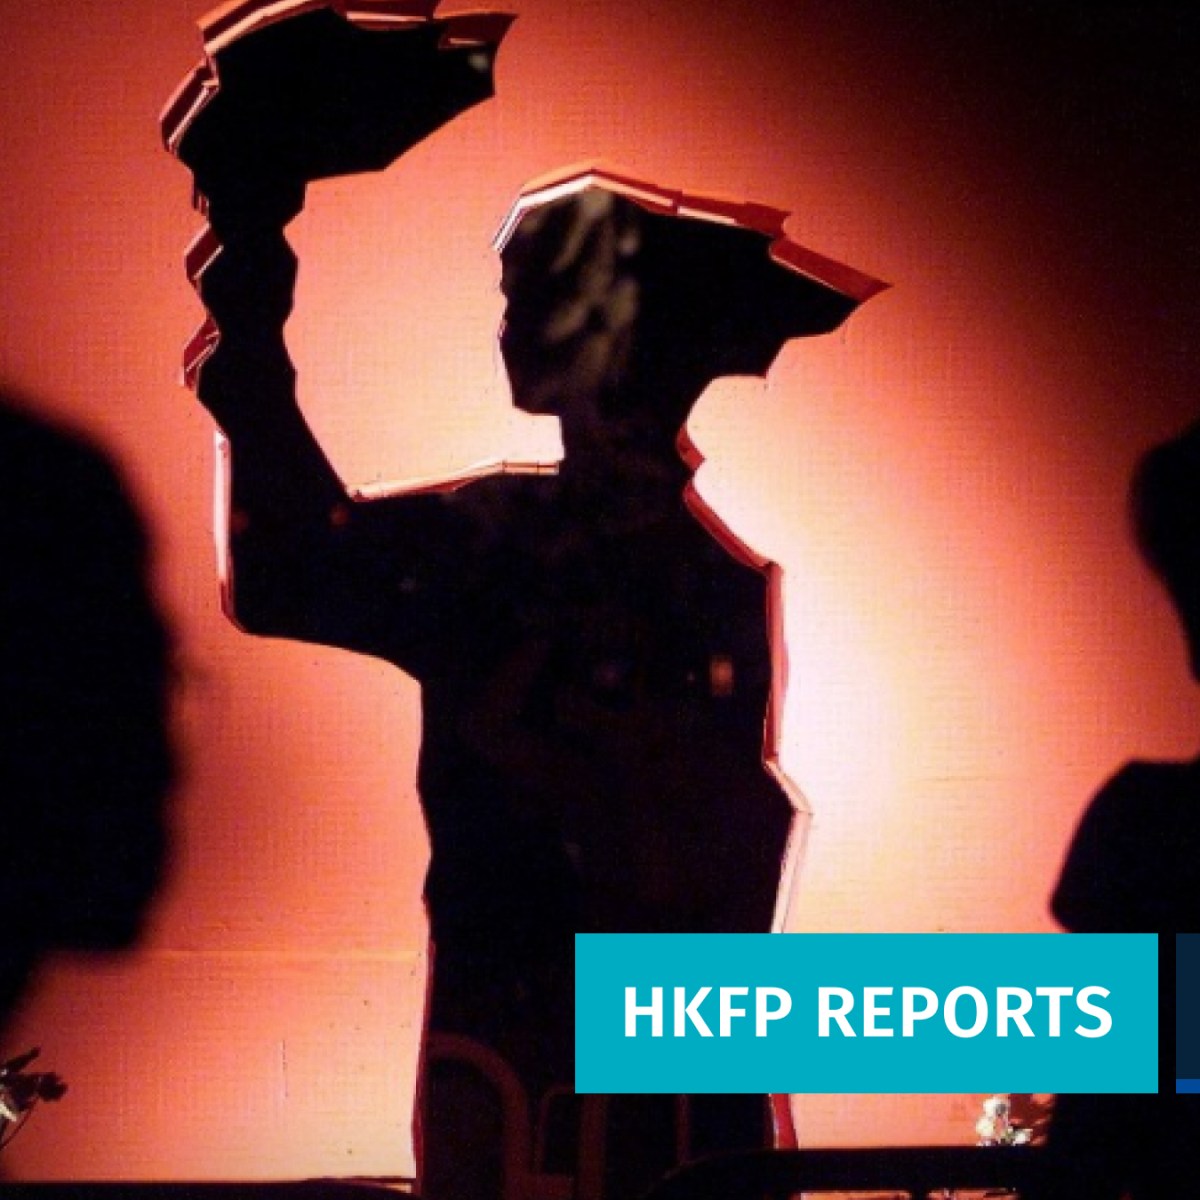 ‘Statues tell stories, but so does removing them’: Hong Kong’s 48-hour campus crackdown on the memory of the Tiananmen Massacre